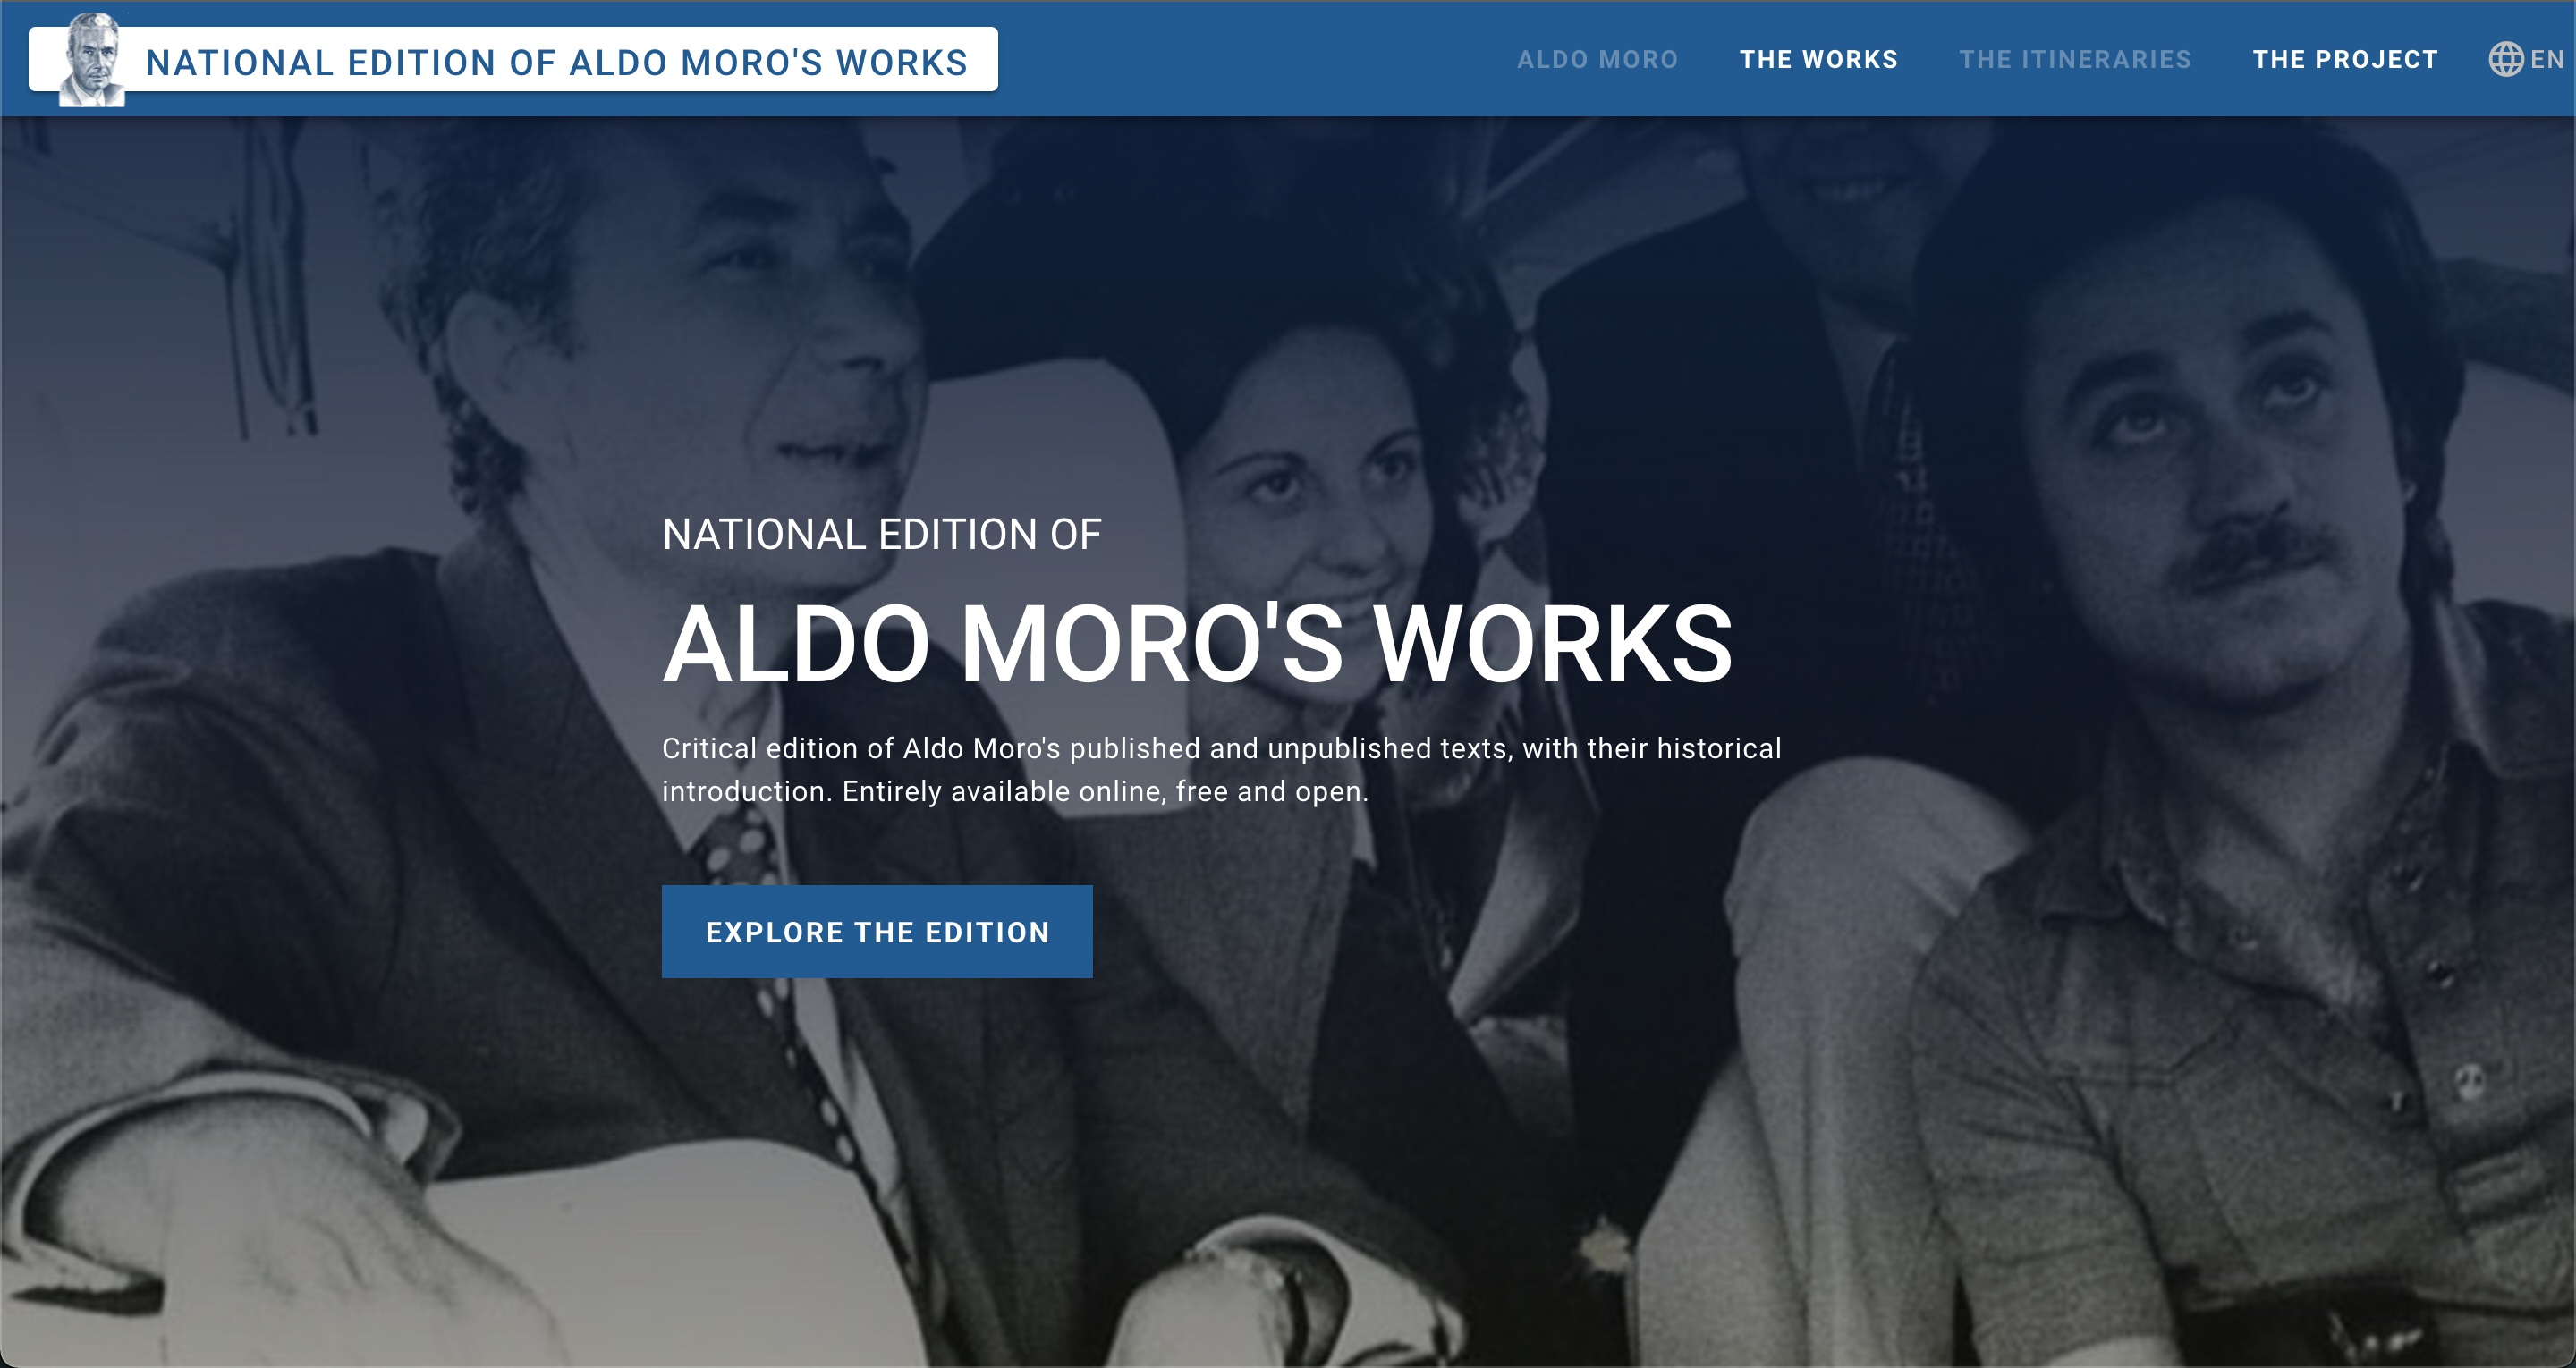 The National Edition of Aldo Moro's works